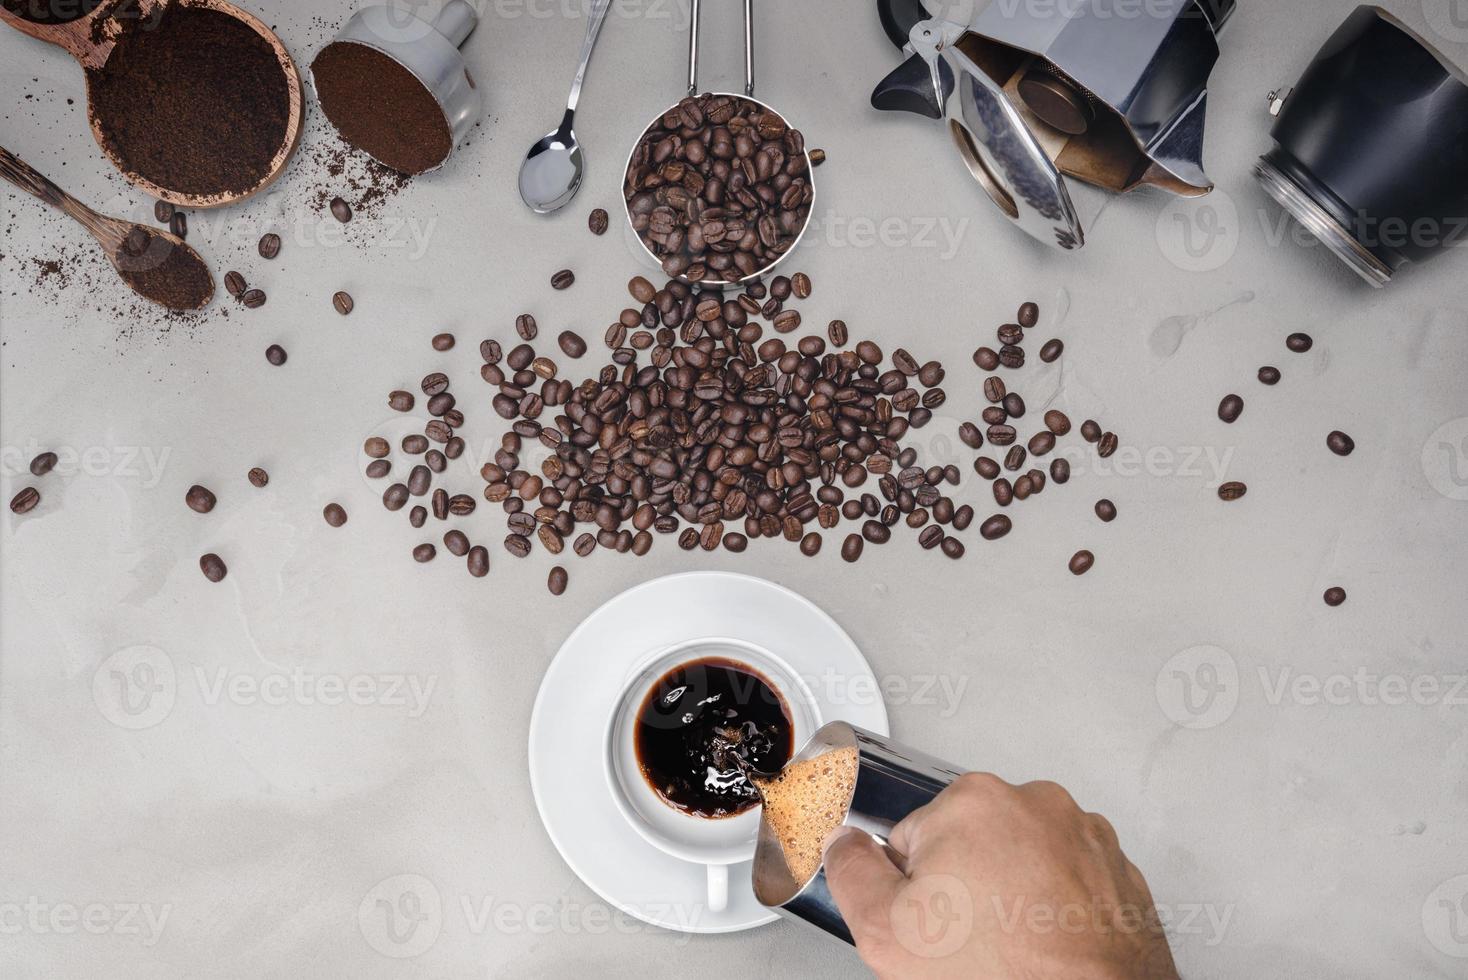 Background with assorted coffee, coffee beans, Cup of black  coffee, Coffee maker equipment photo